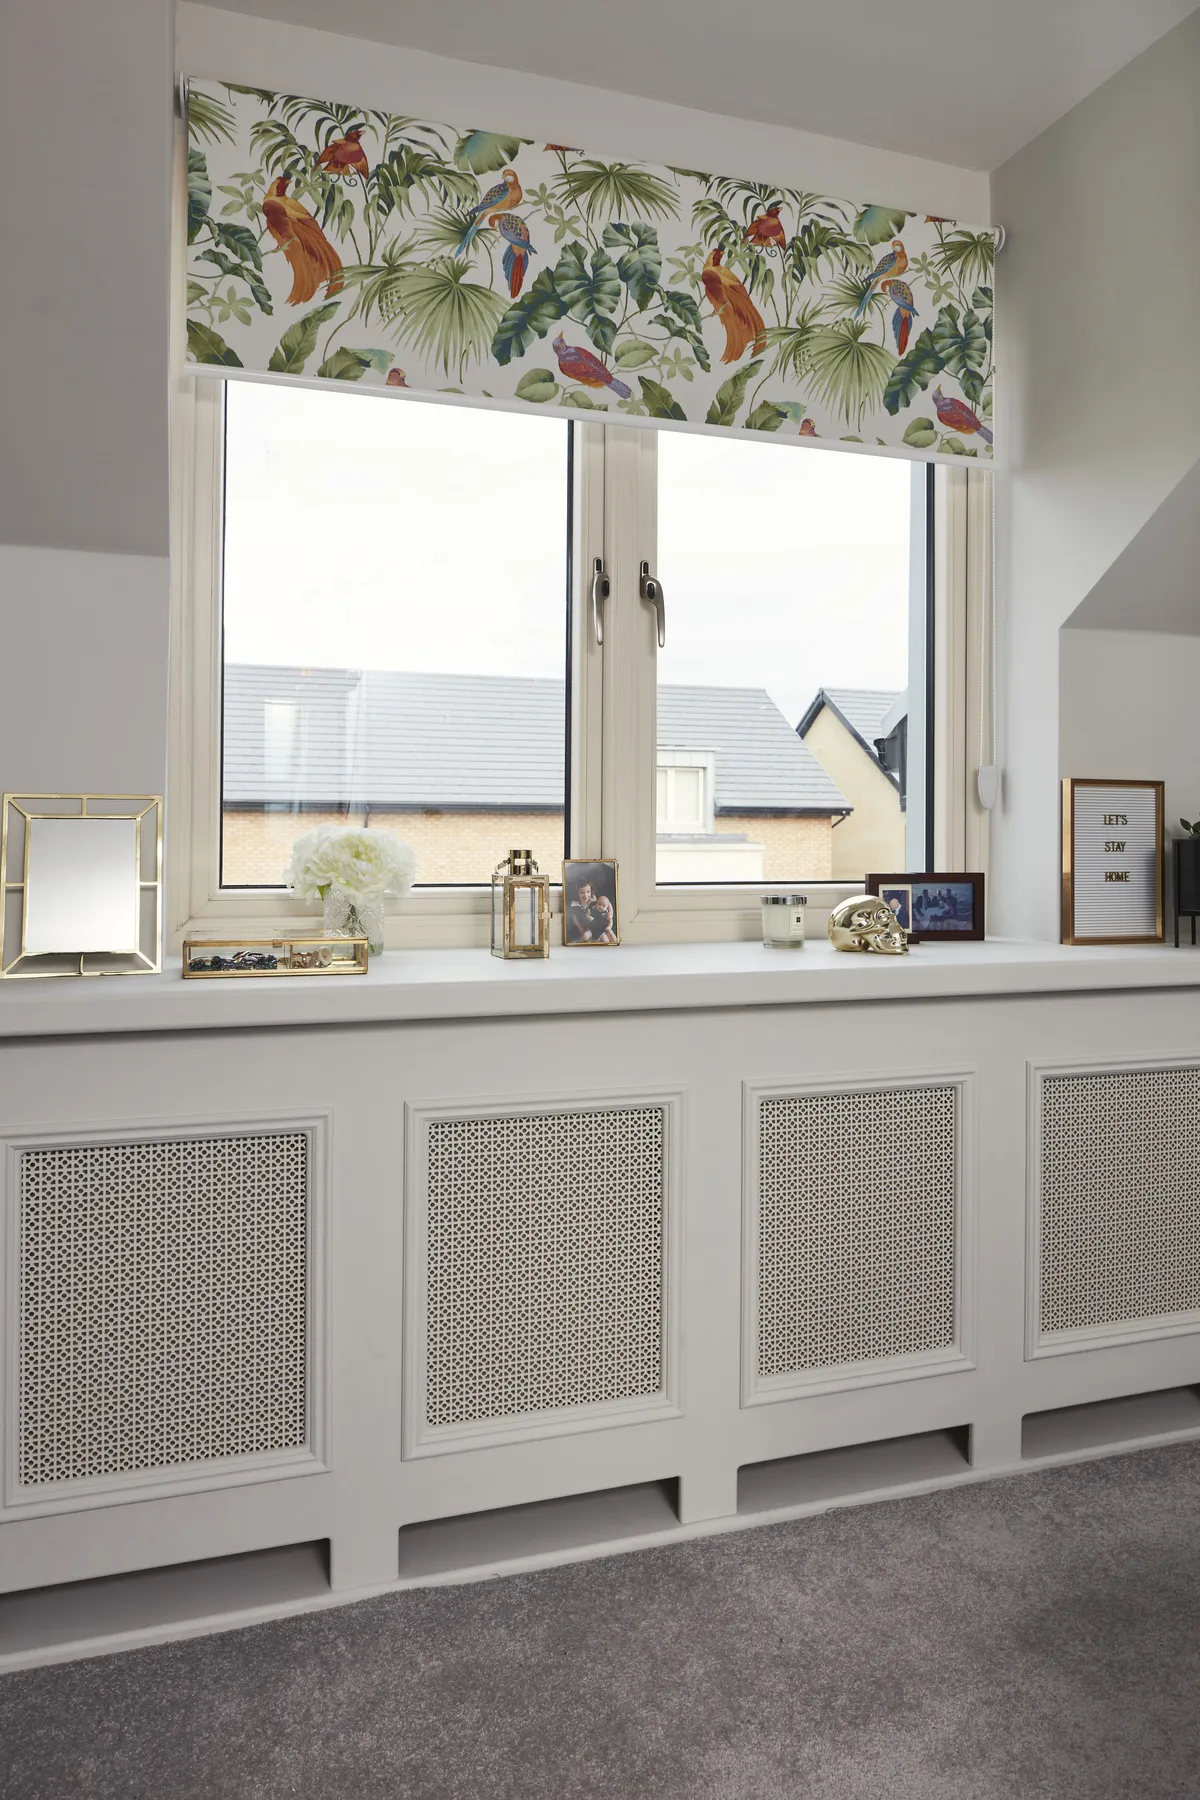 The new dormer window is dressed with a roller blind from DecorativaDesign on Etsy. ‘This bold, botanical-print fabric was exactly what I was after,’ Anne Marie says. ‘It took some time to find it. It adds a lovely, fresh feel to the room’